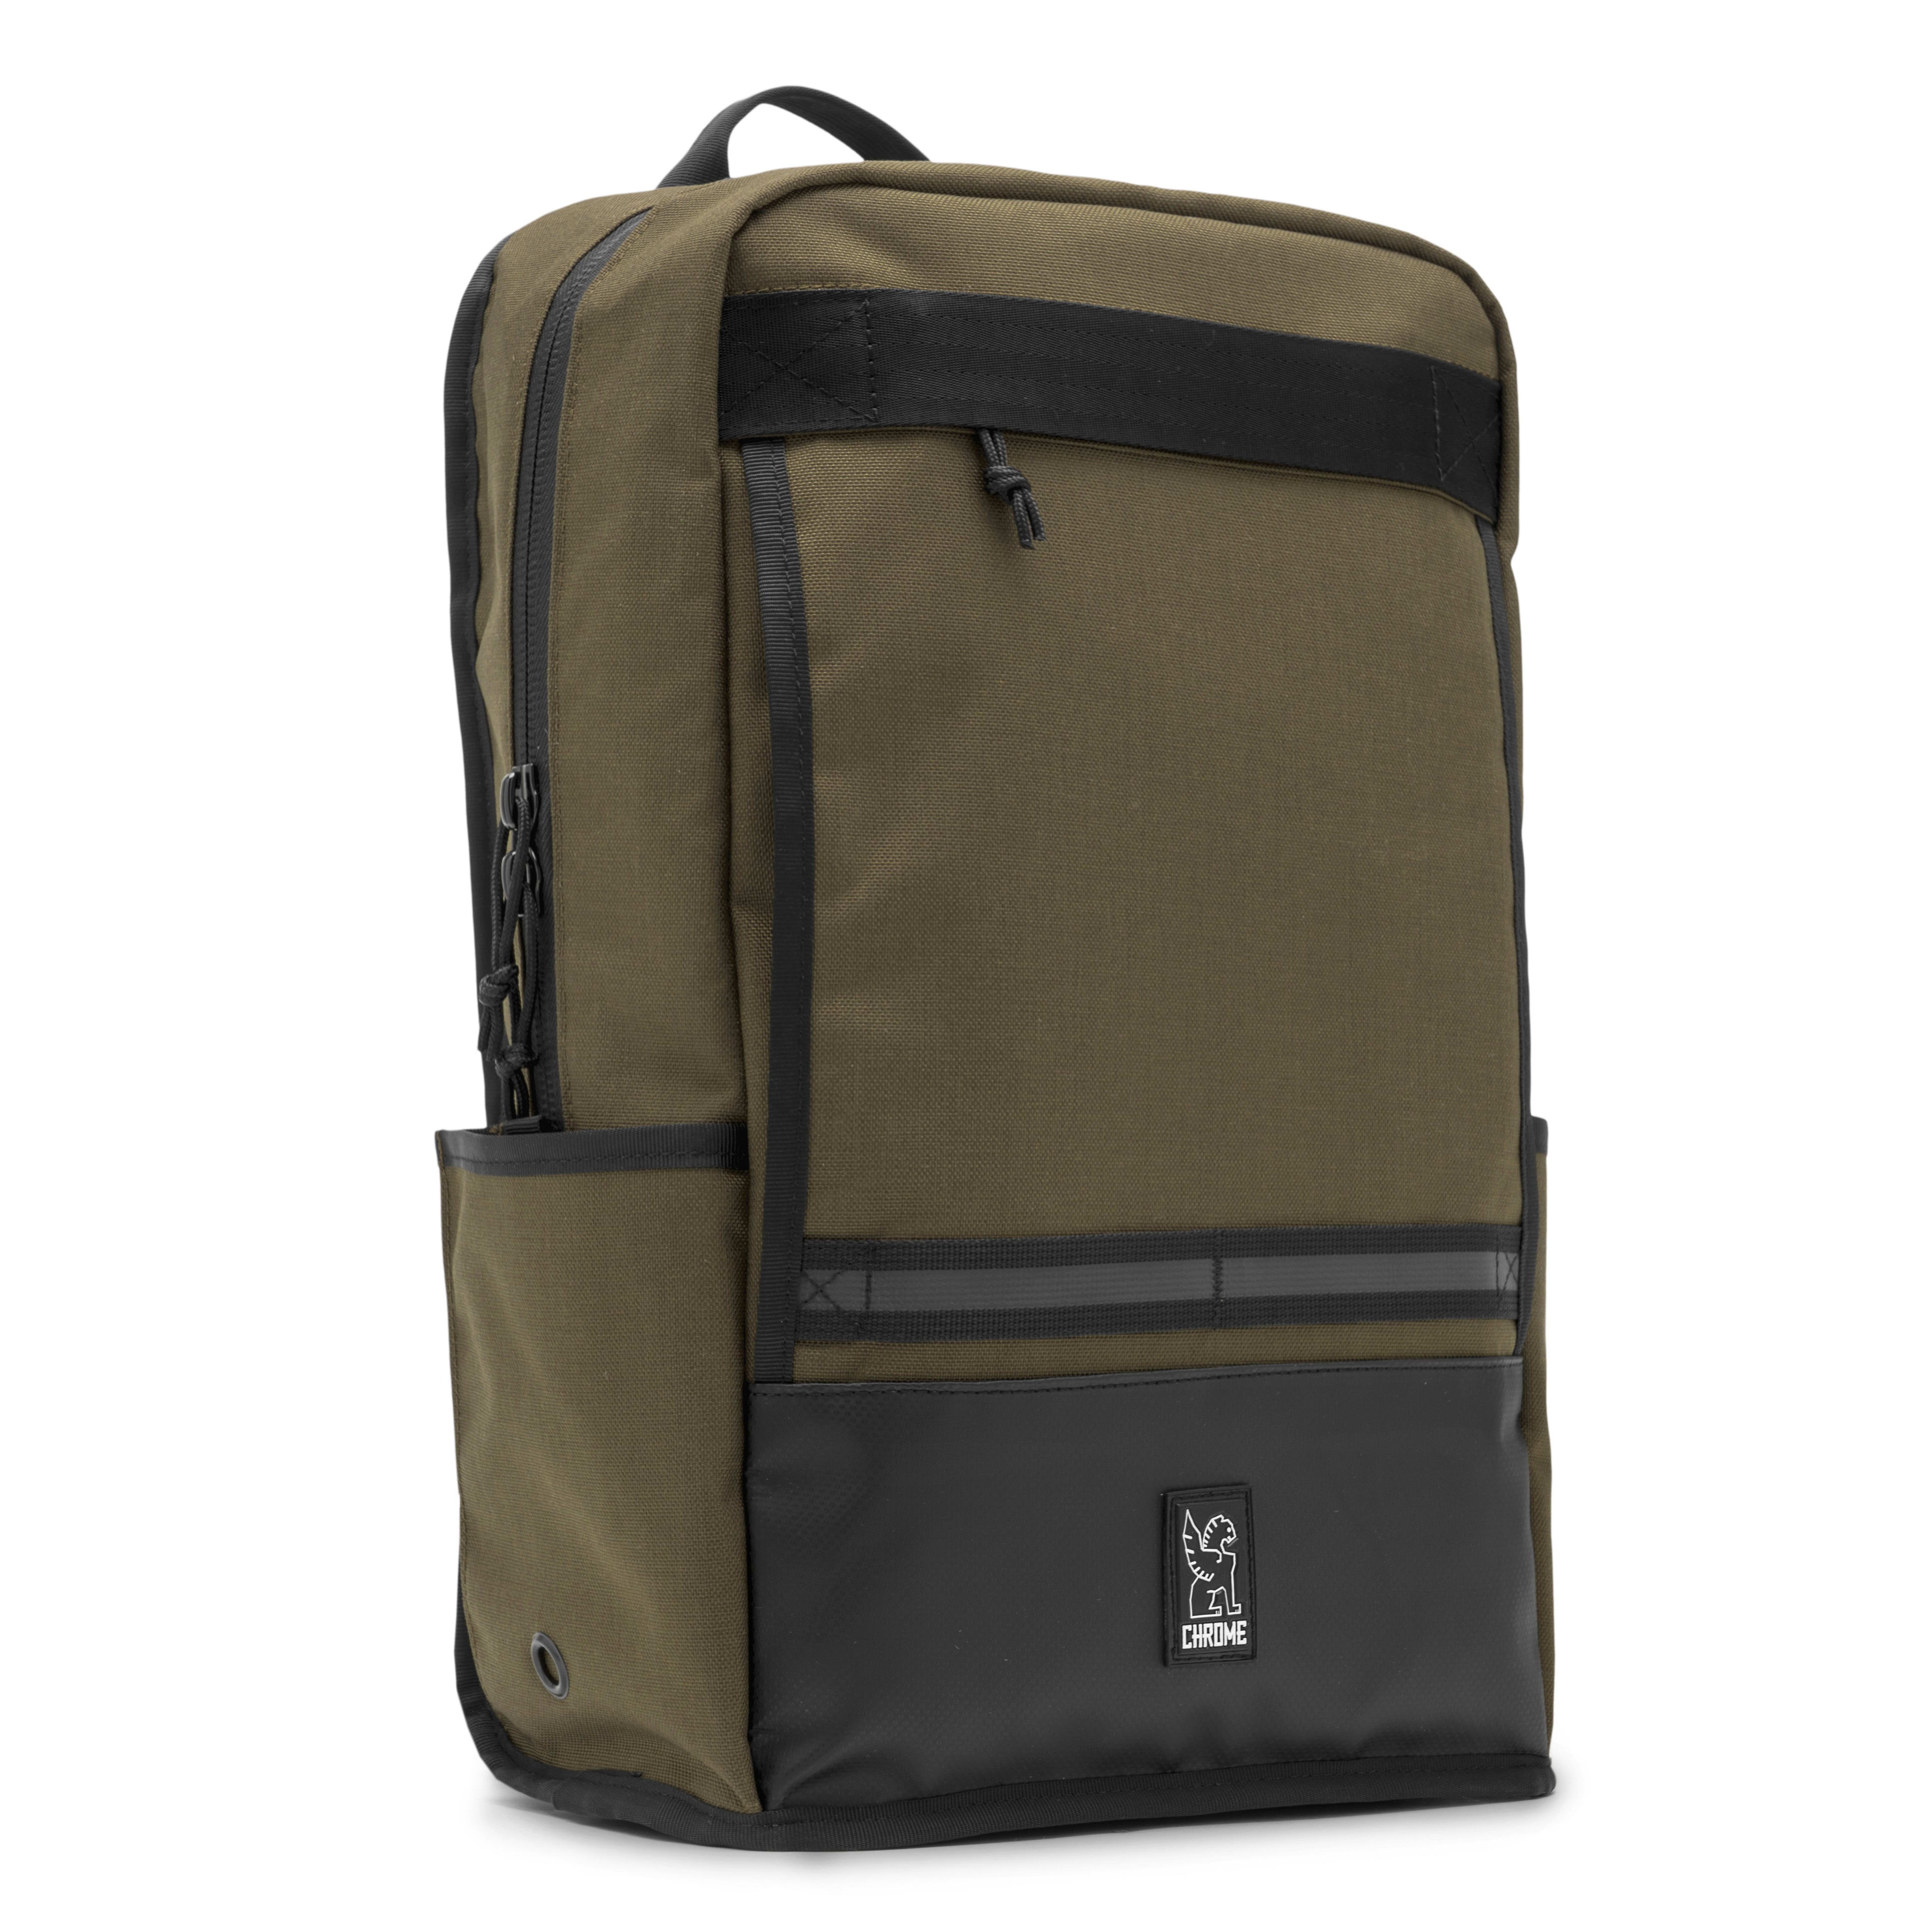 Buy Chrome Hondo Backpack from Outnorth